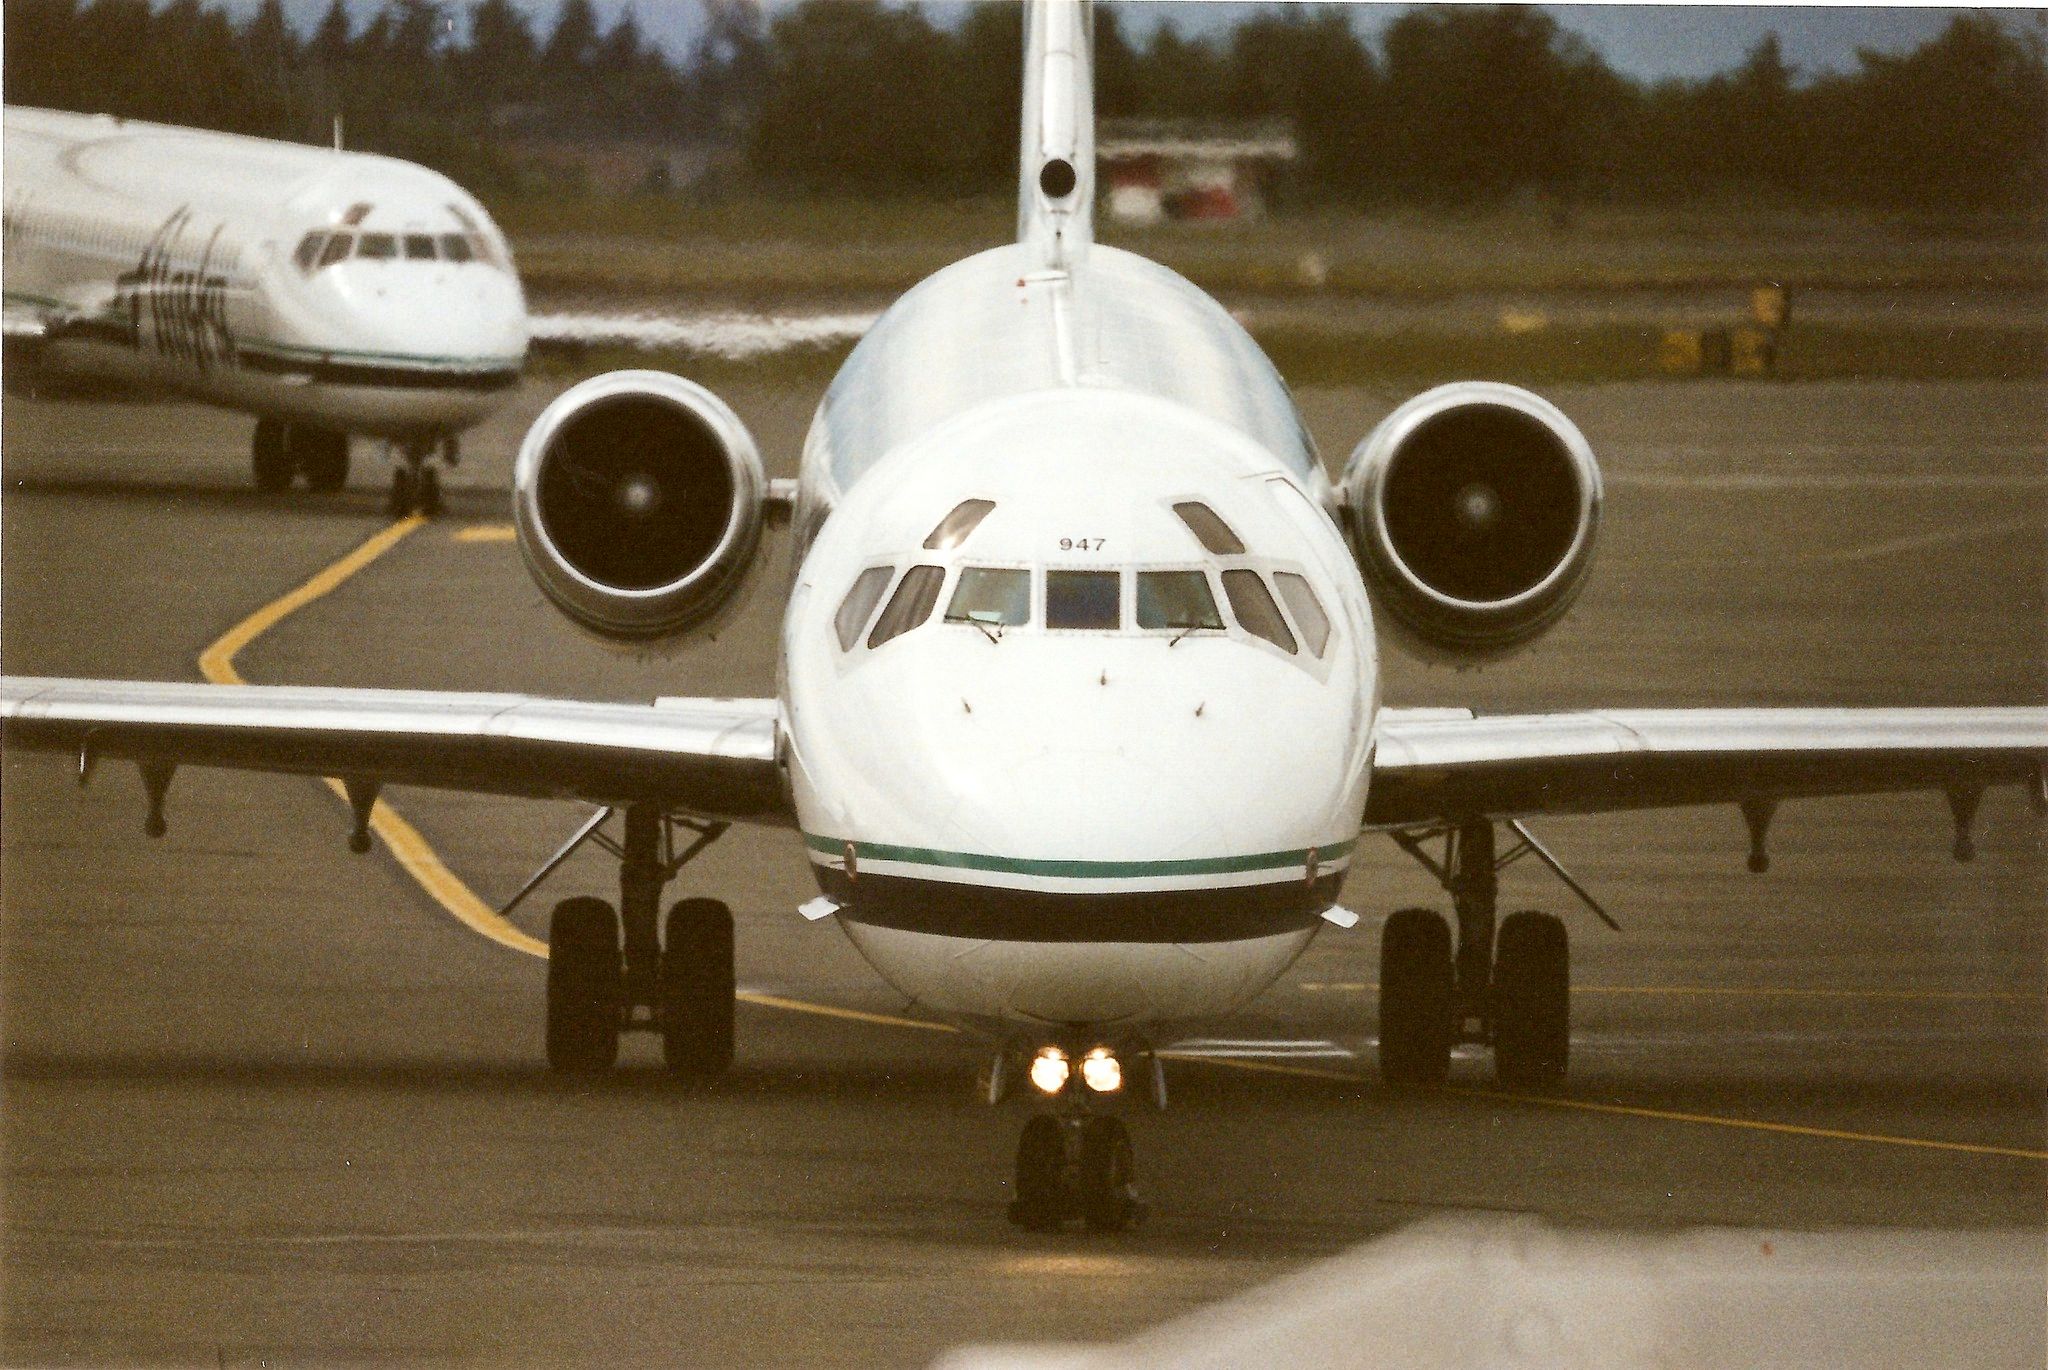 An Alaska Airlines MD-80 on an airport apron.